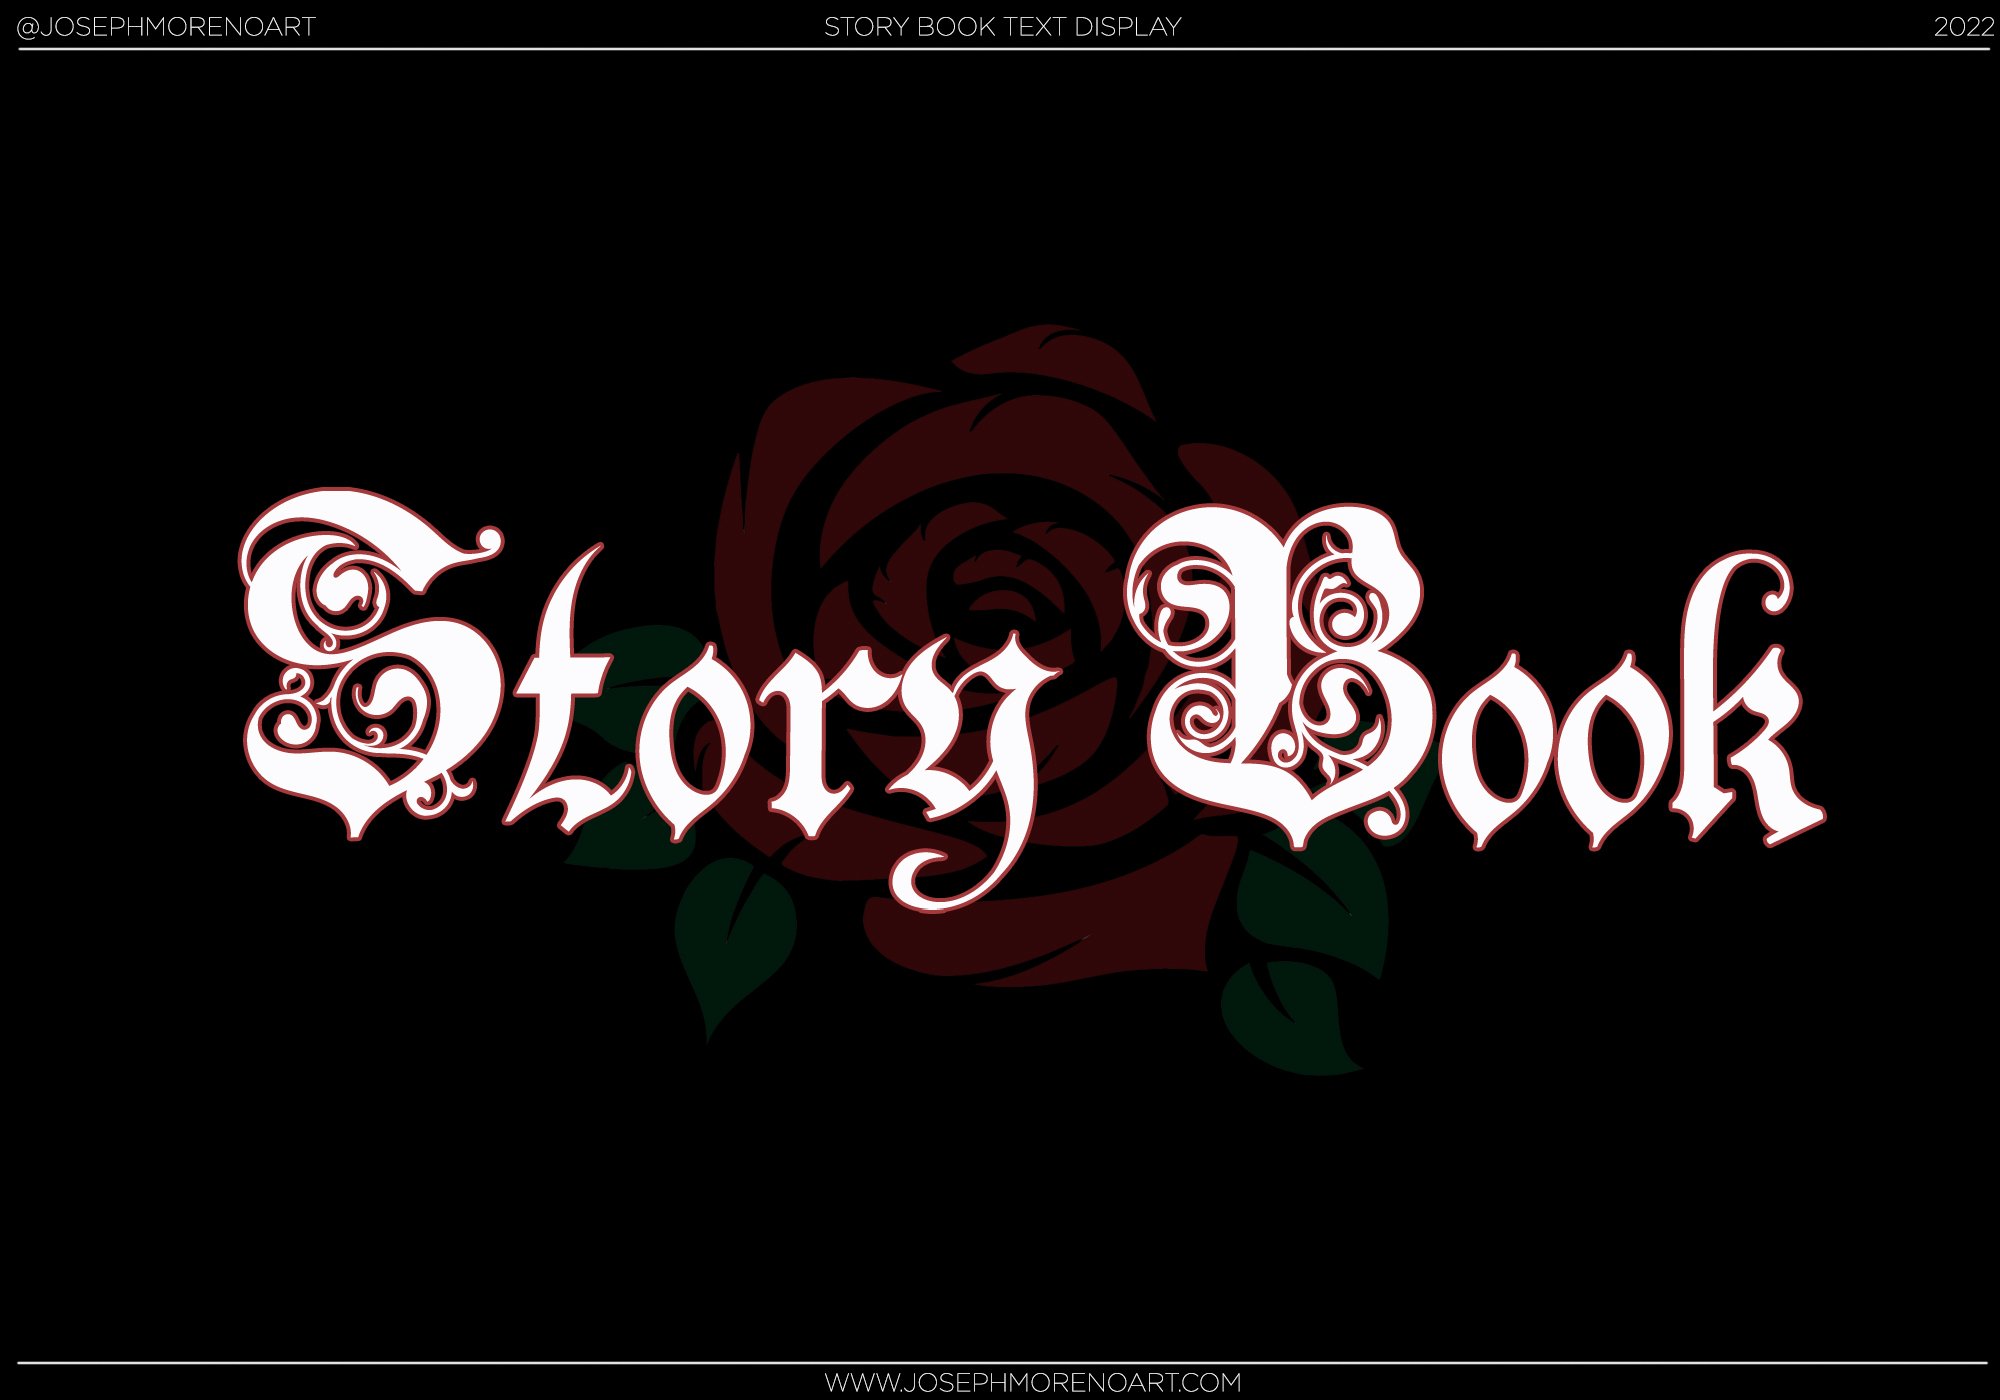 Story Book Text cover image.